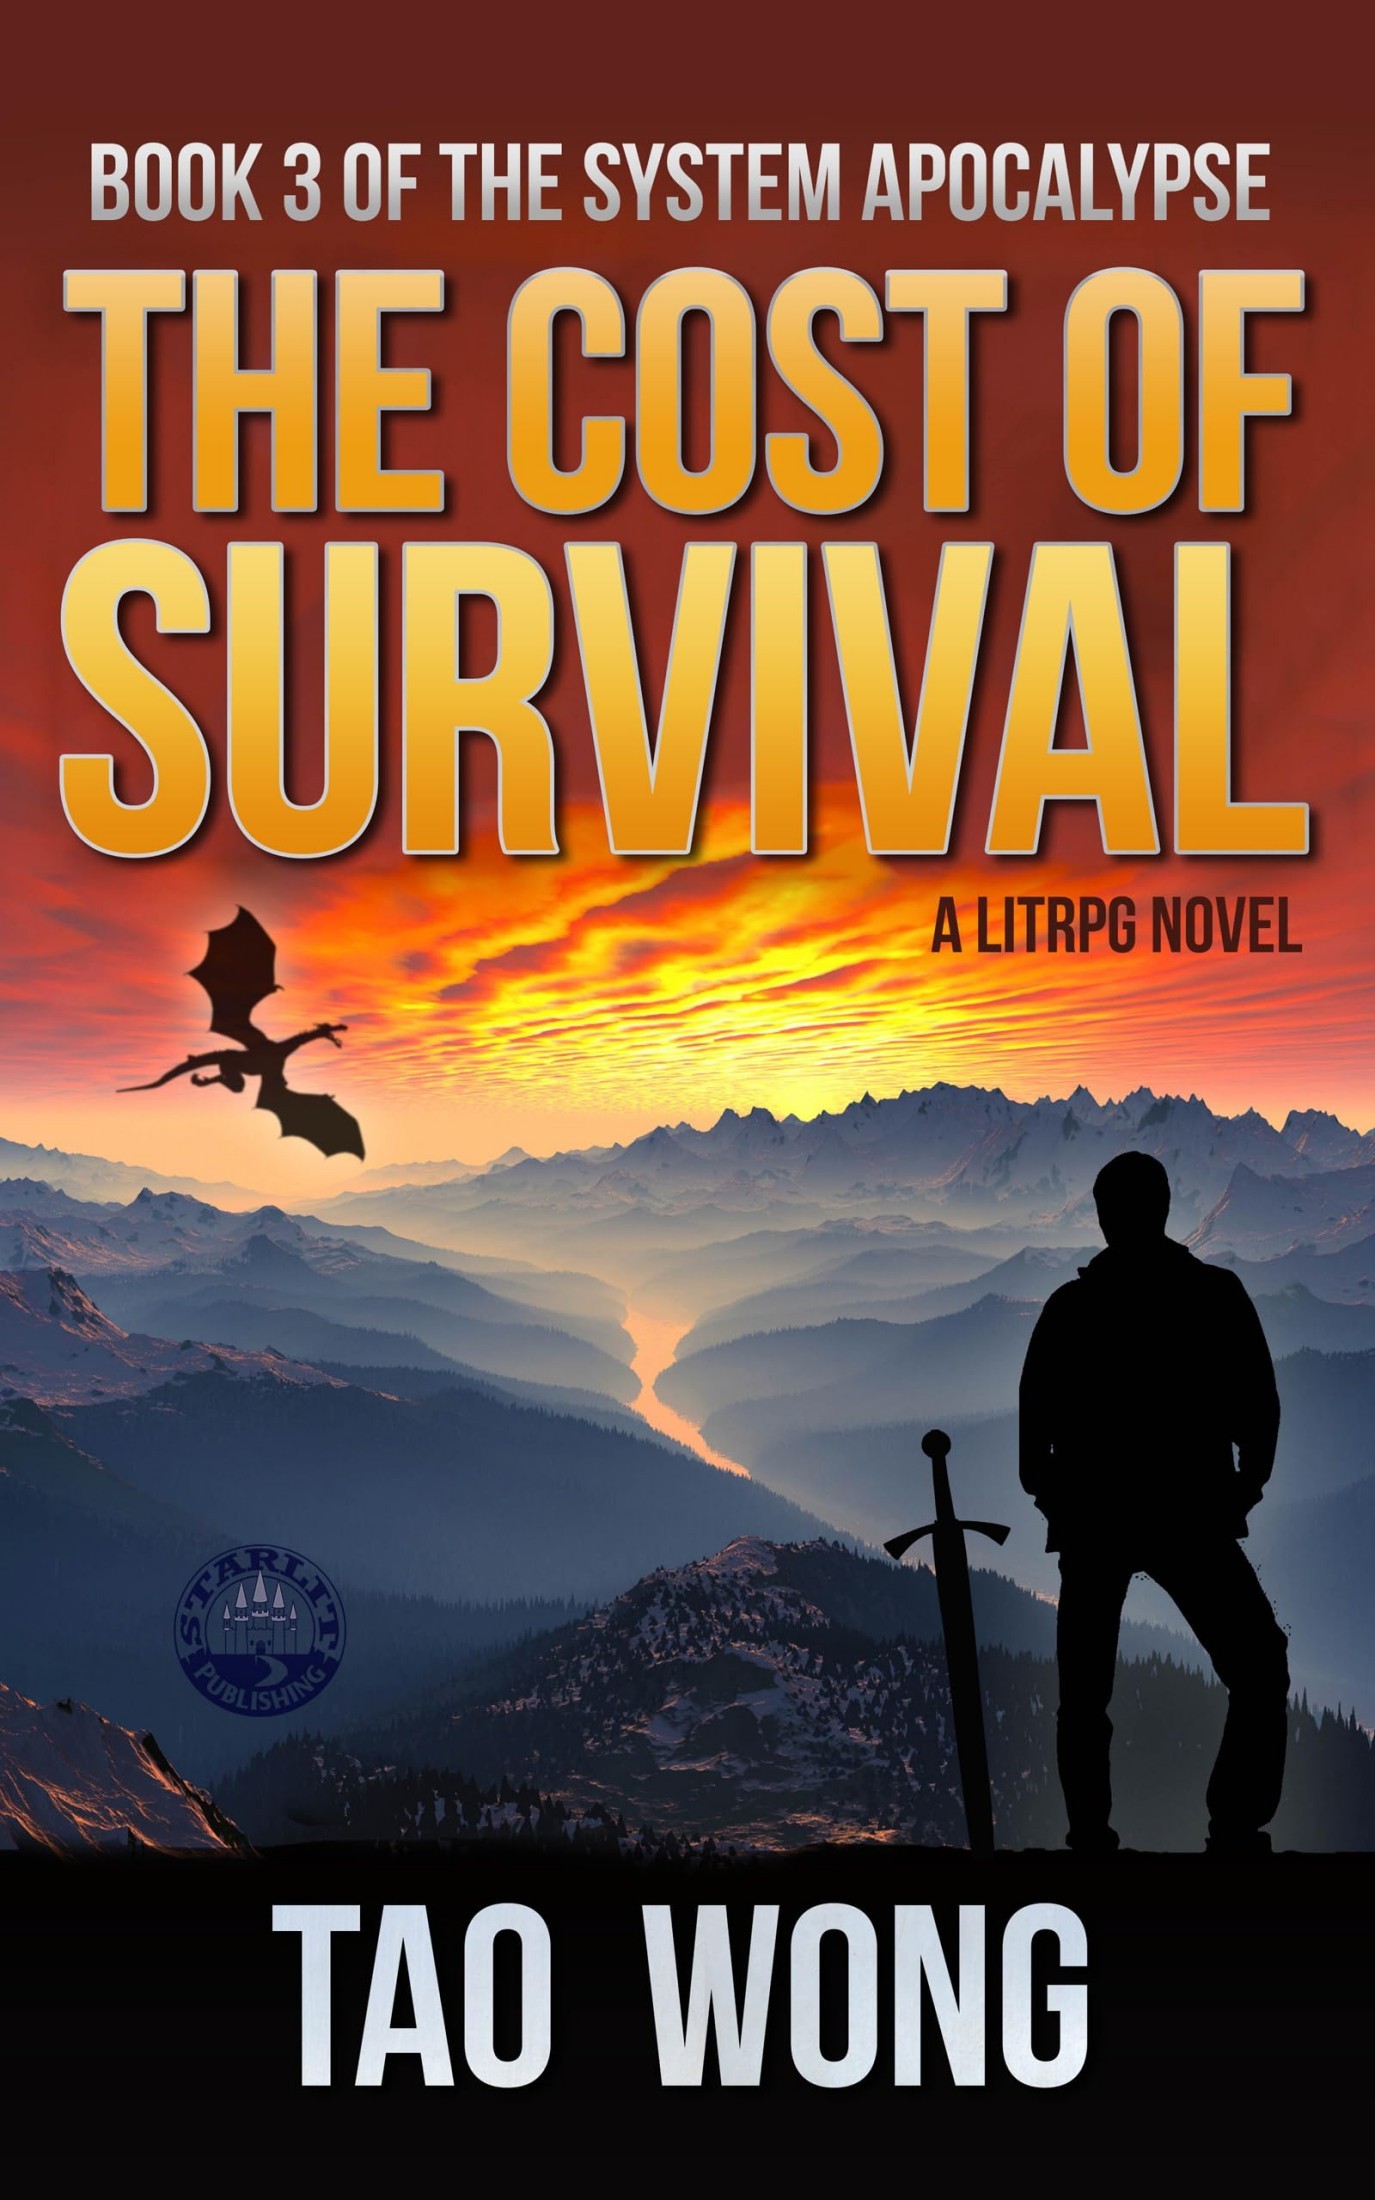 The Cost of Survival